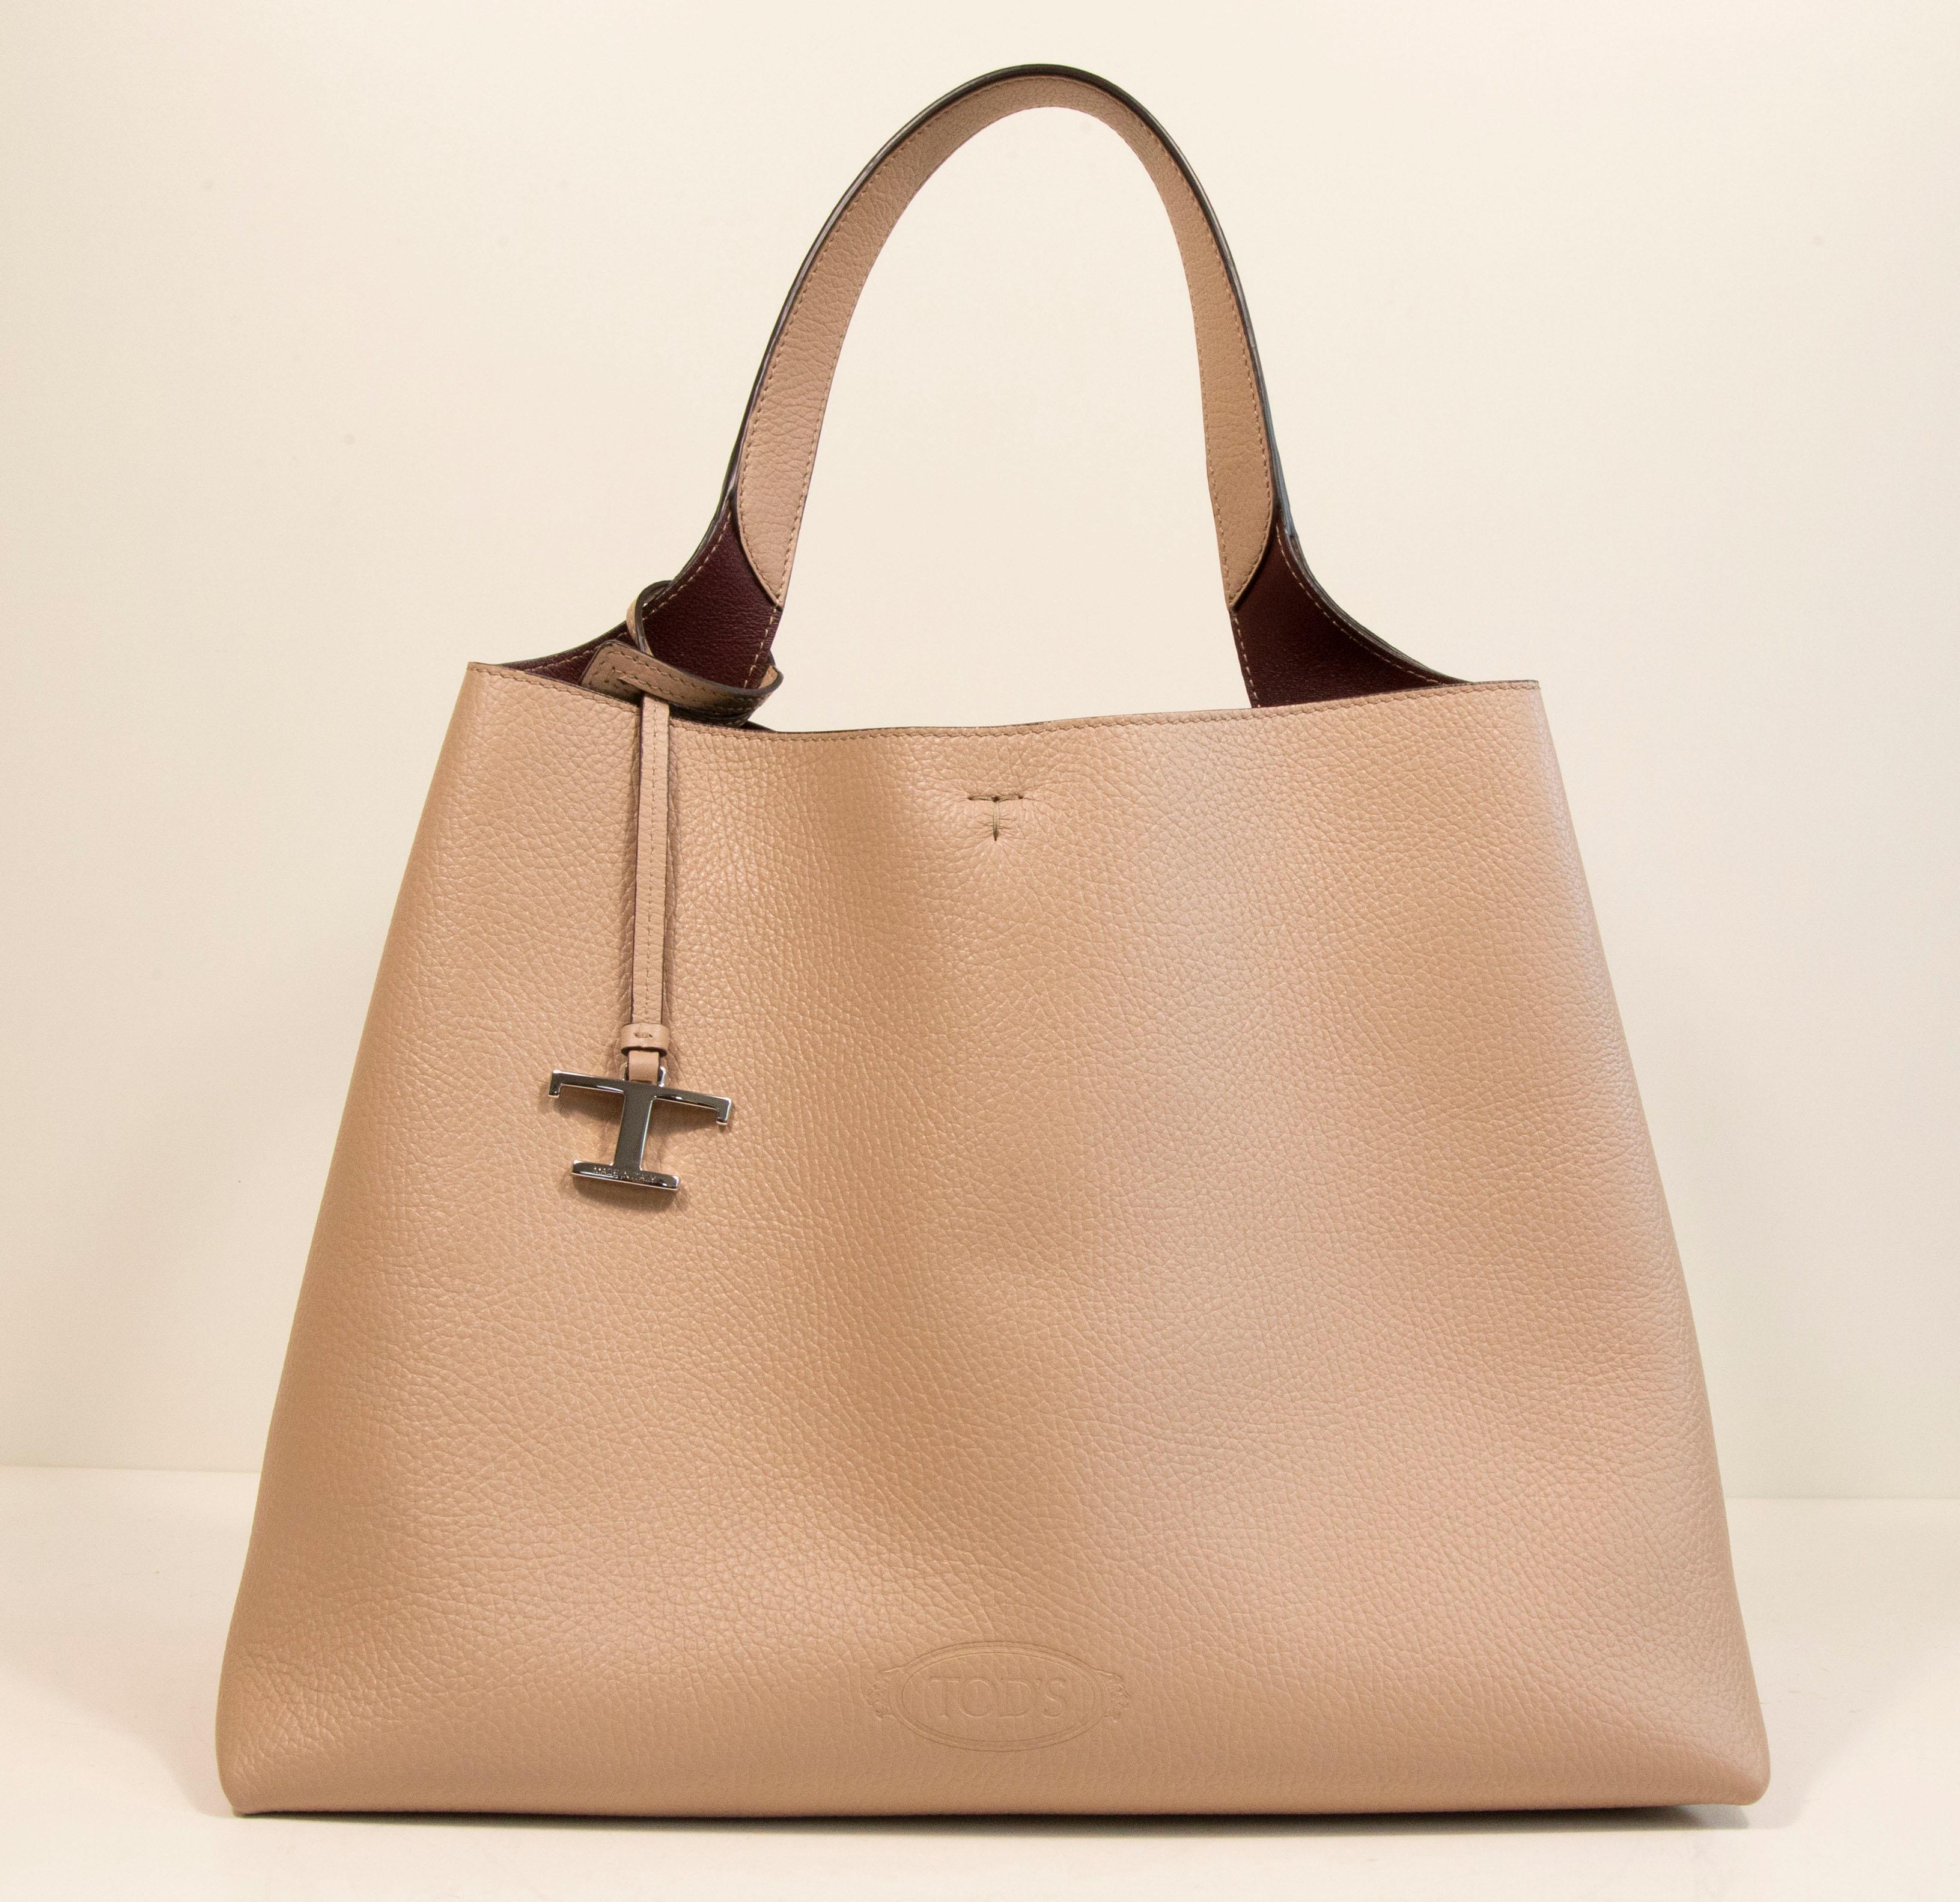 A medium TOD's shoulder bag made of hammered leather in nude/beige leather with silver toned hardware. The interior is lined with smooth bordeaux leather, and it consists of two compartments separated by a zipped leather pouch. The bag features